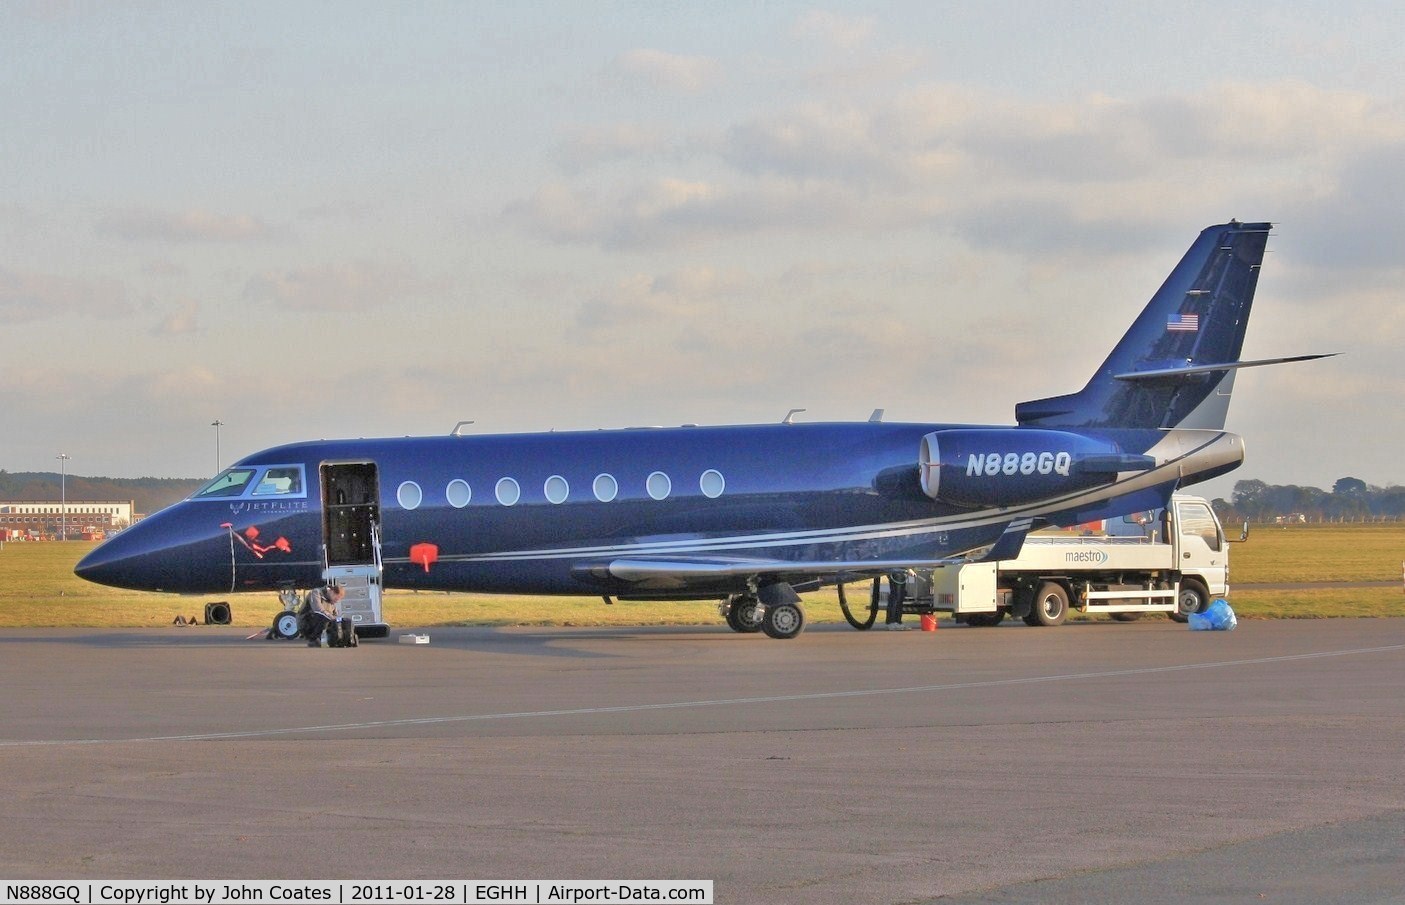 N888GQ, 2007 Israel Aircraft Industries Gulfstream 200 C/N 167, Parked at Signatures